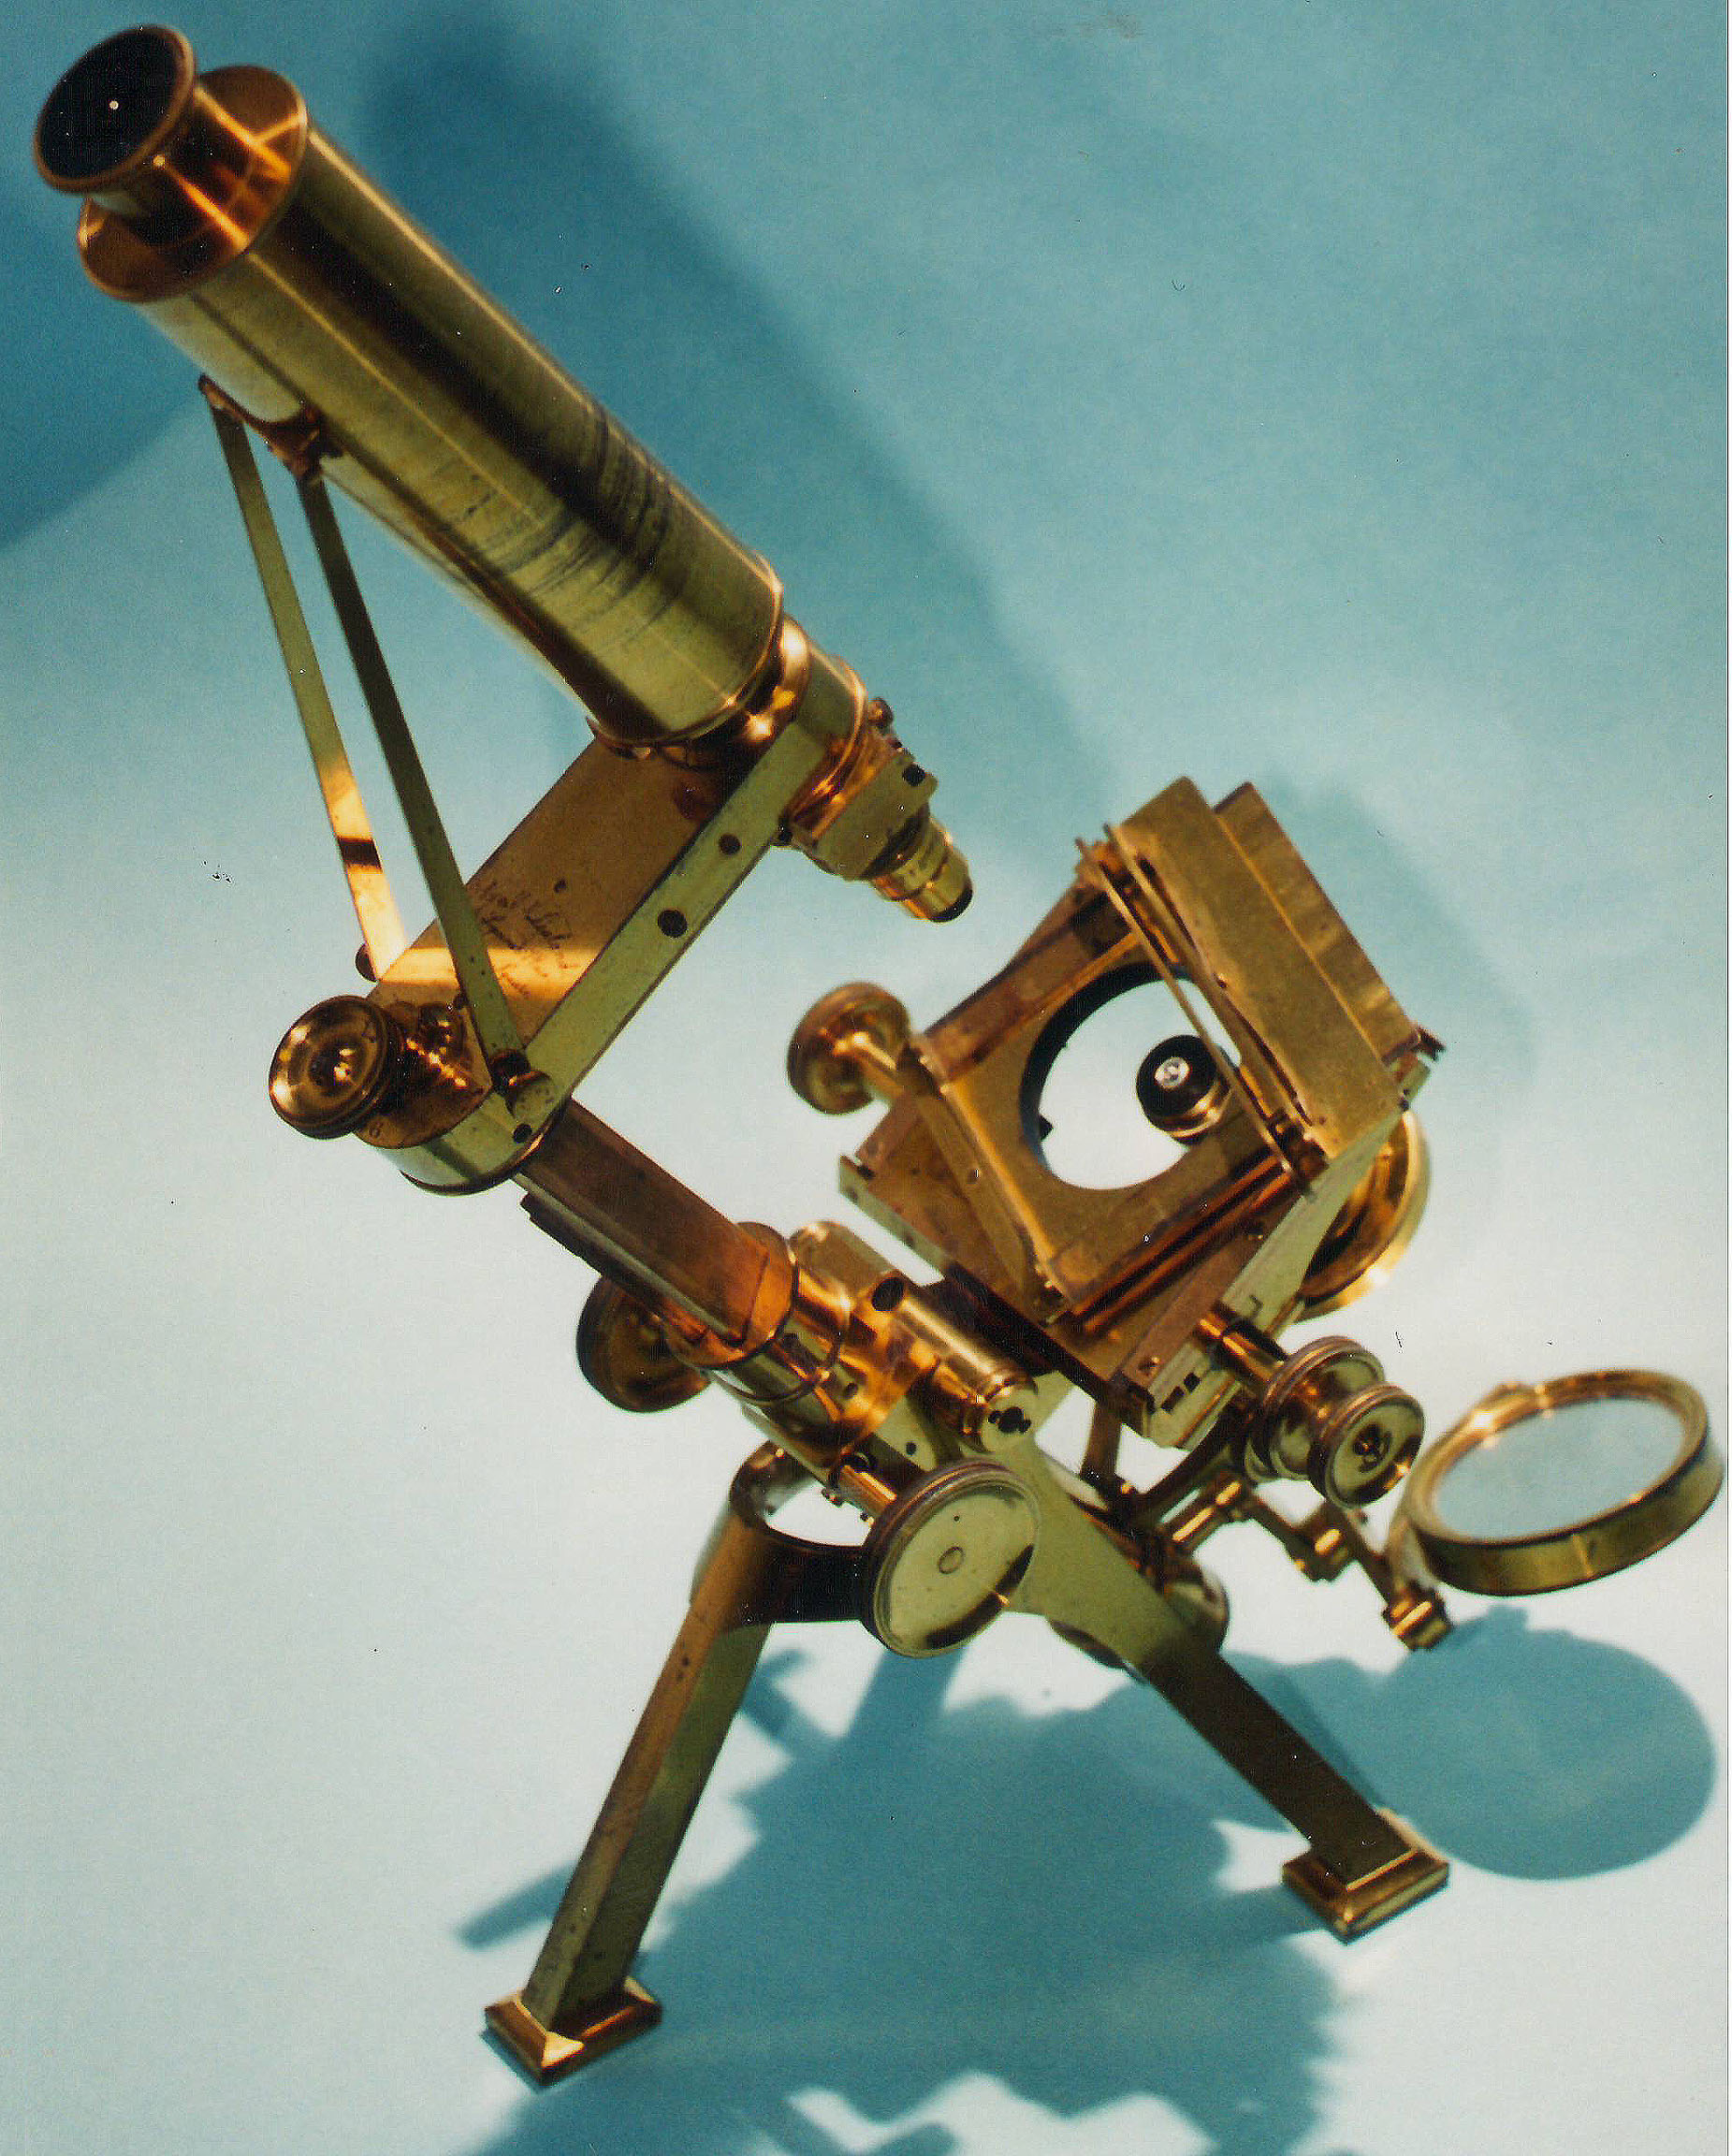 Powell and Lealand Improved First Class Microscope of  1856